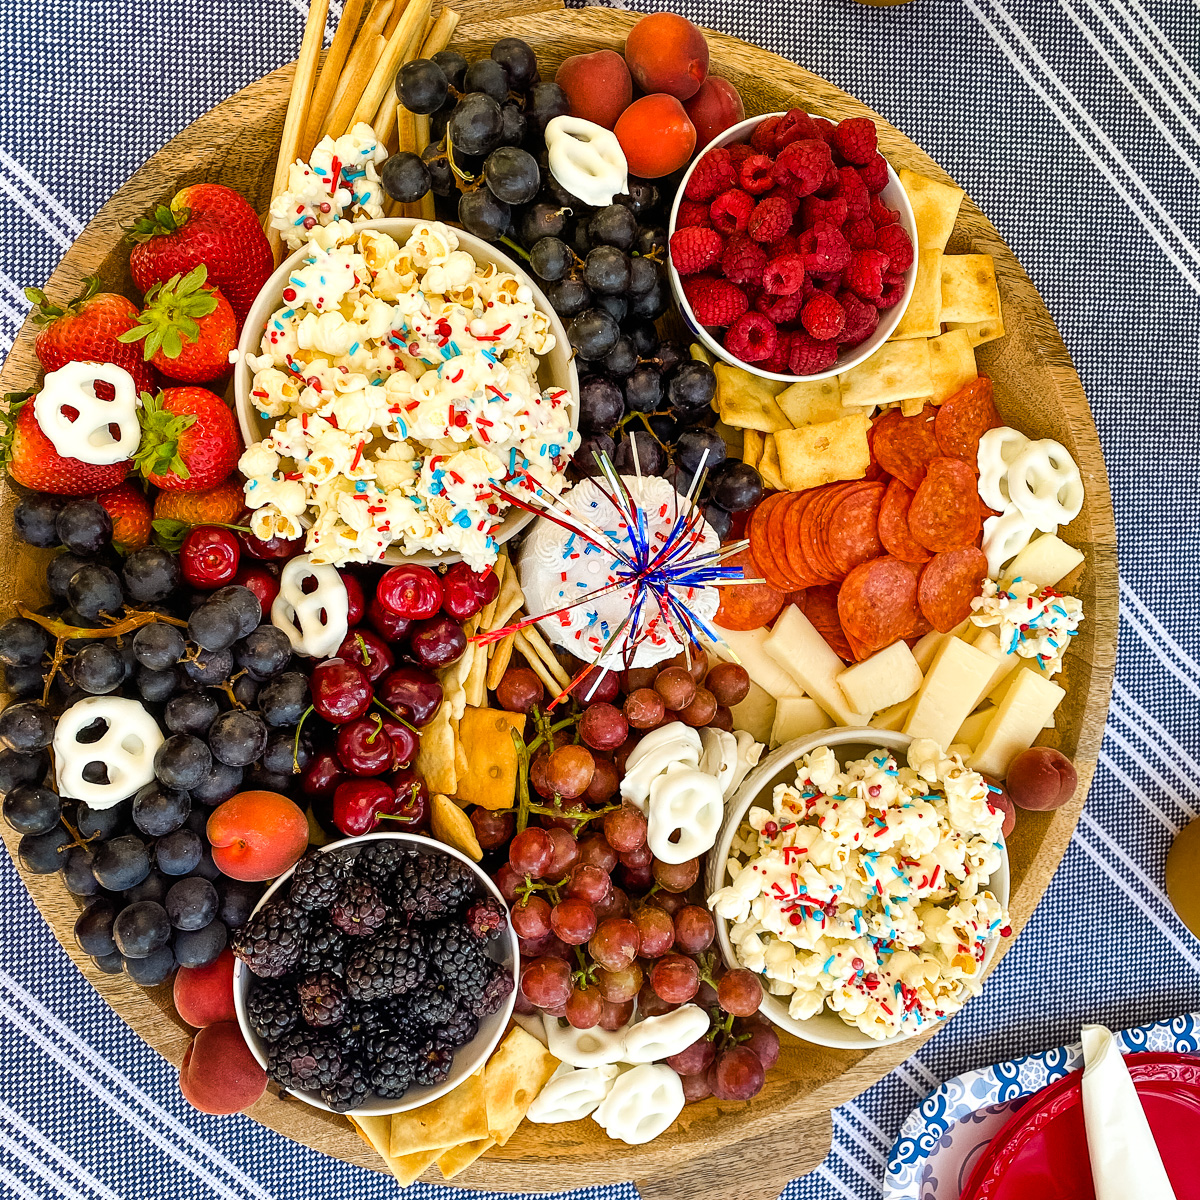 https://mylifeandkids.com/wp-content/uploads/2023/06/4th-of-July-Charcuterie-Board-Featured-Image.jpg